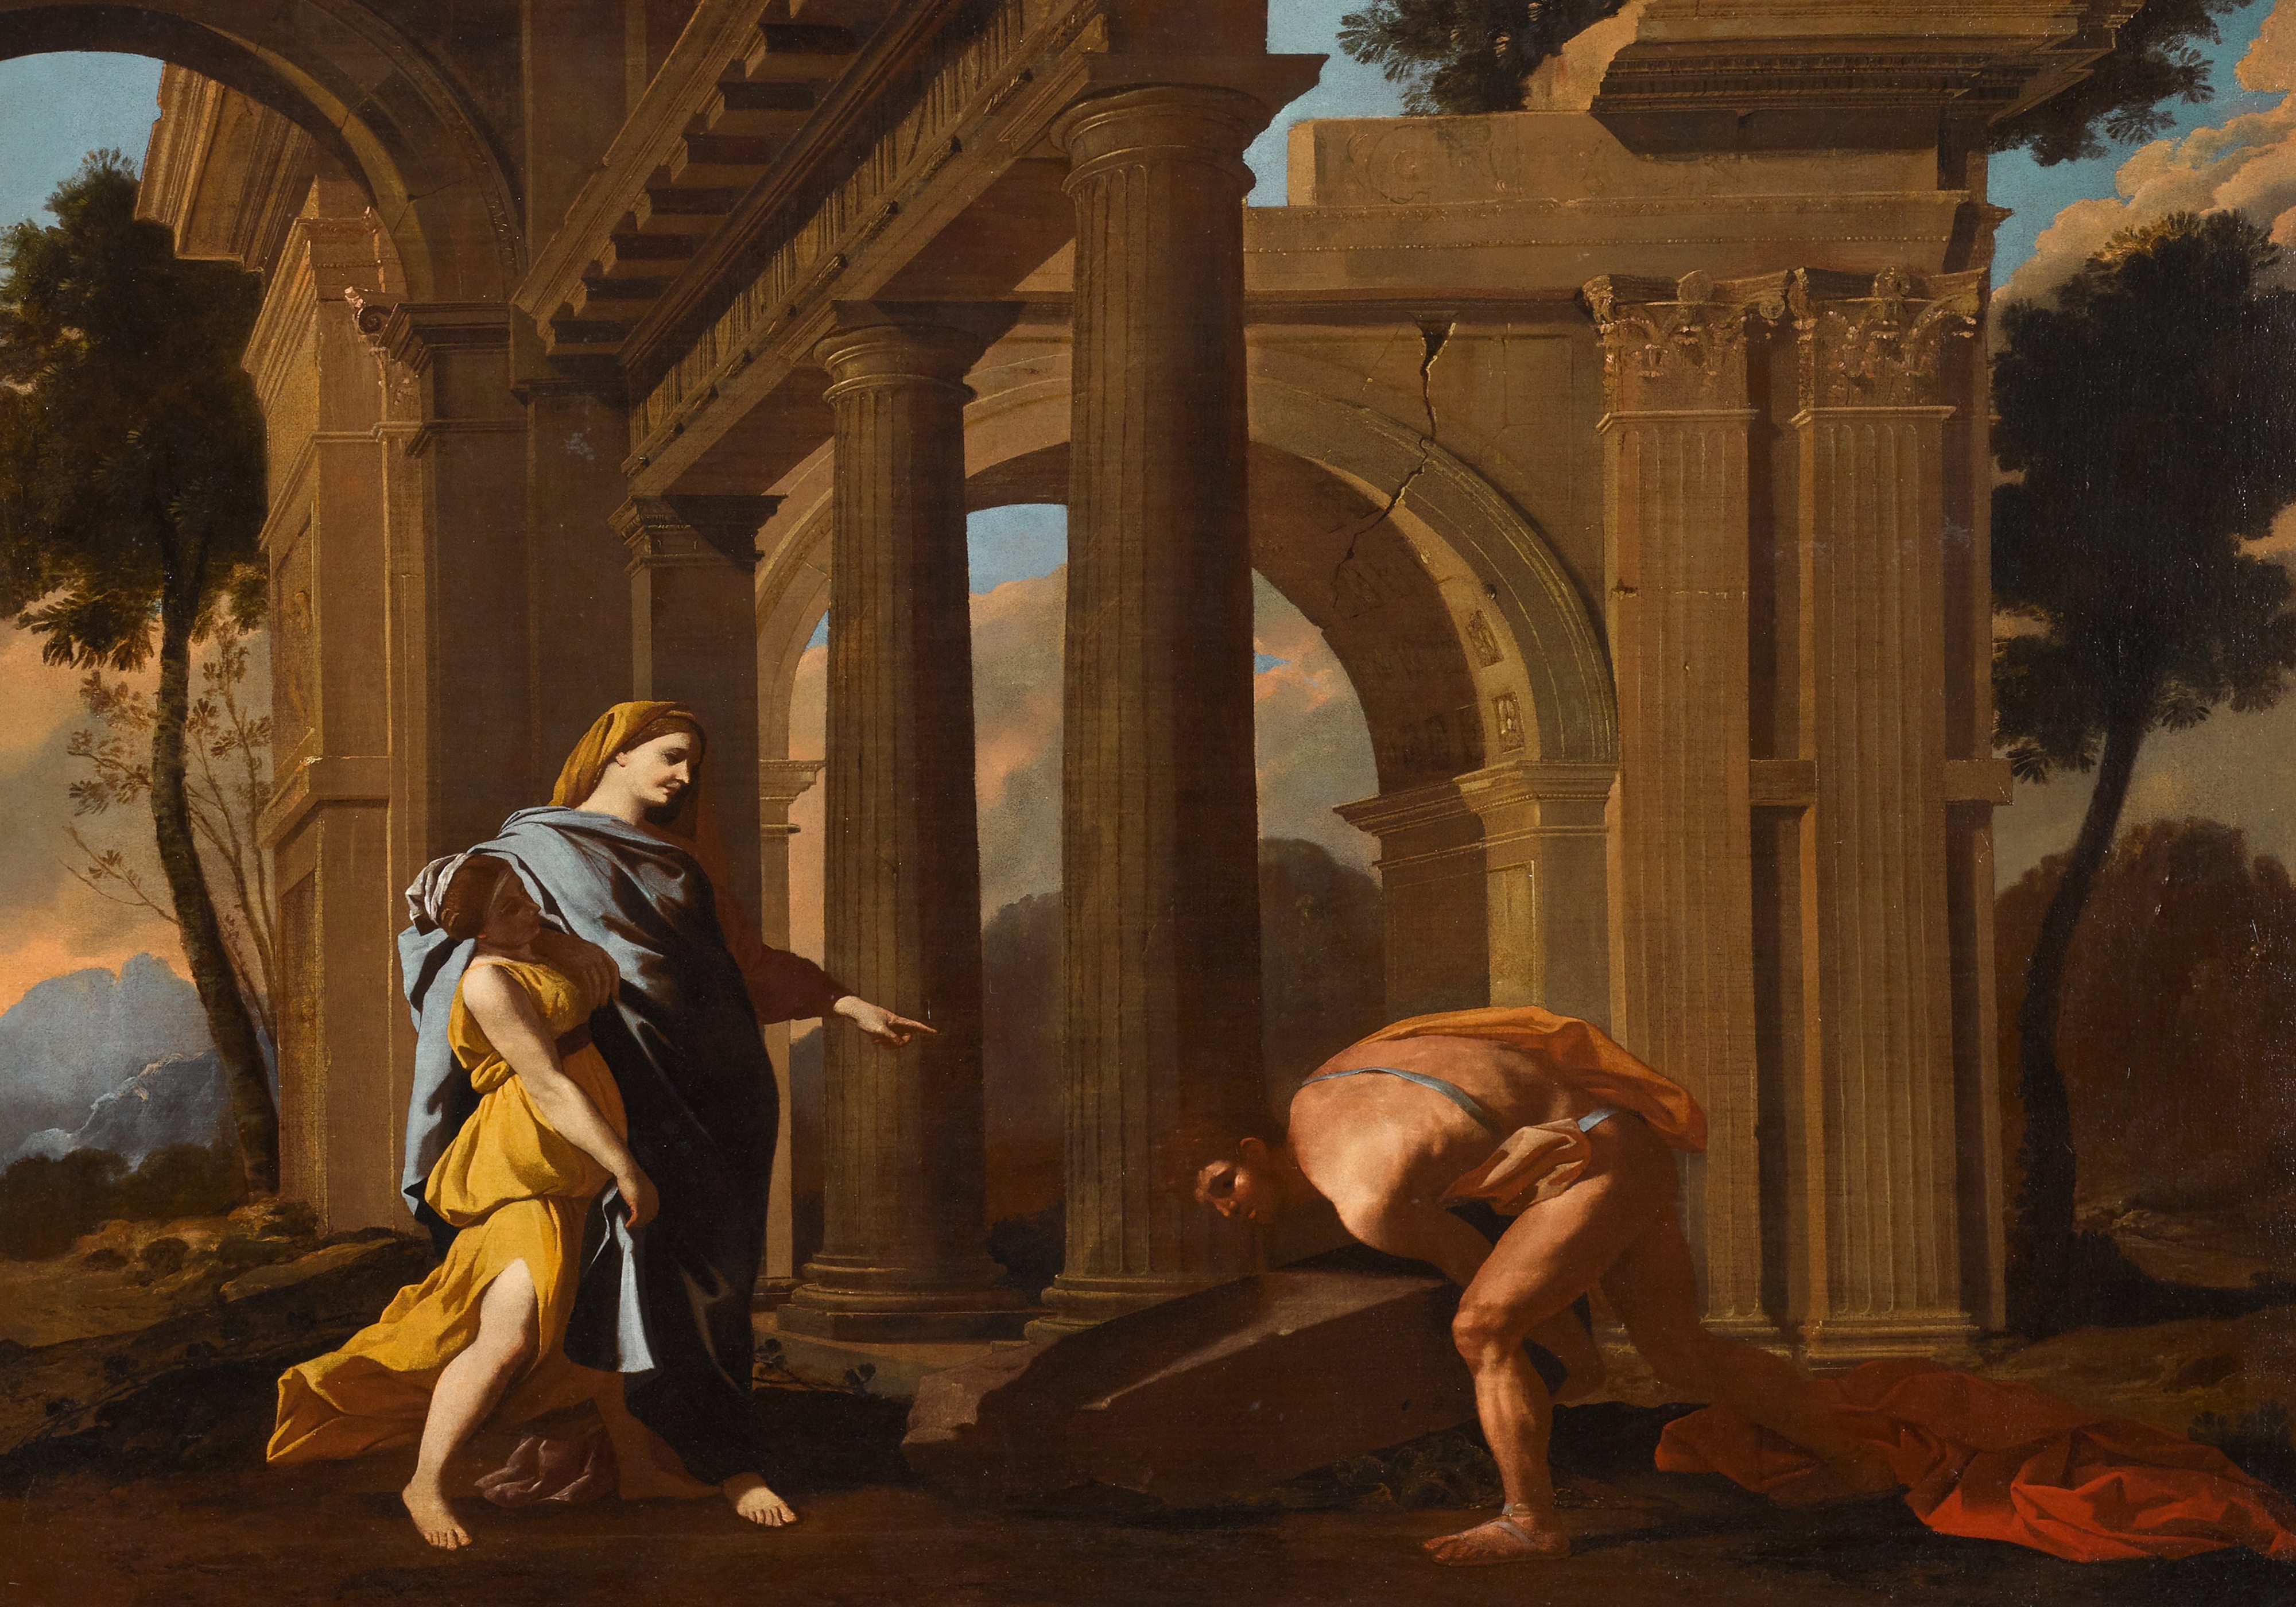 Nicholas Poussin (1594 - 1665) and Jean Lemaire (1598 - 1659) Theseus Rediscovering His Father's Sword